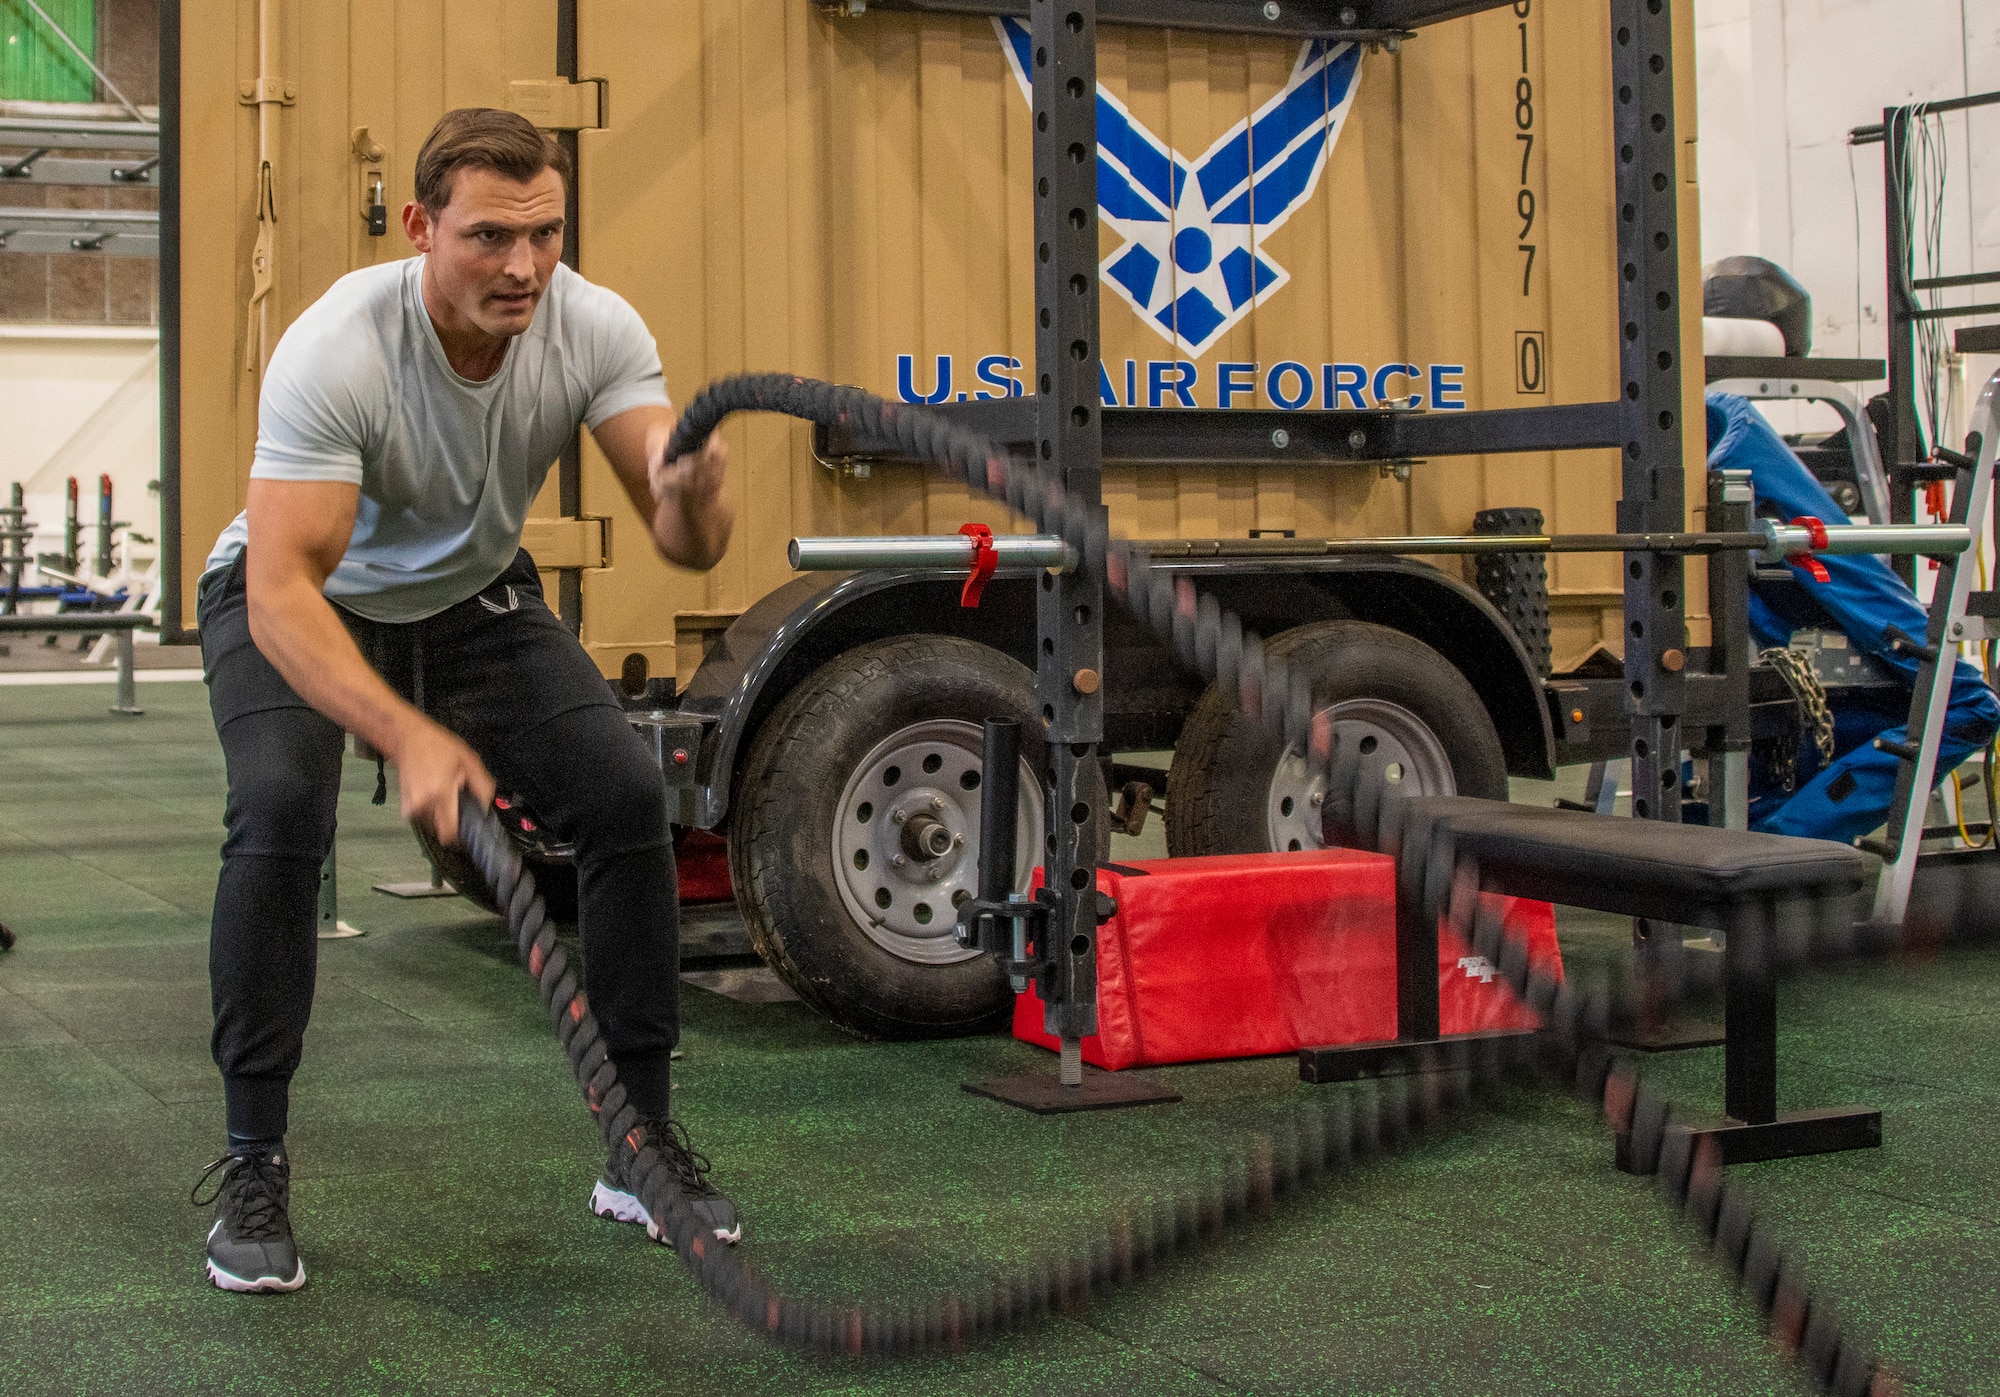 U.S. Air Force Senior Airman Joshua Knutson, 60th Force Support Squadron fitness specialist, performs a battle rope work out in the Nose Dock Gym Oct 11, 2019, at Travis Air Force Base, California. The new gym at Building 844 was facilitated through existing base funds, equipment donations and volunteer work by the 60th Mission Support Group. (U.S. Air Force photo by Heide Couch